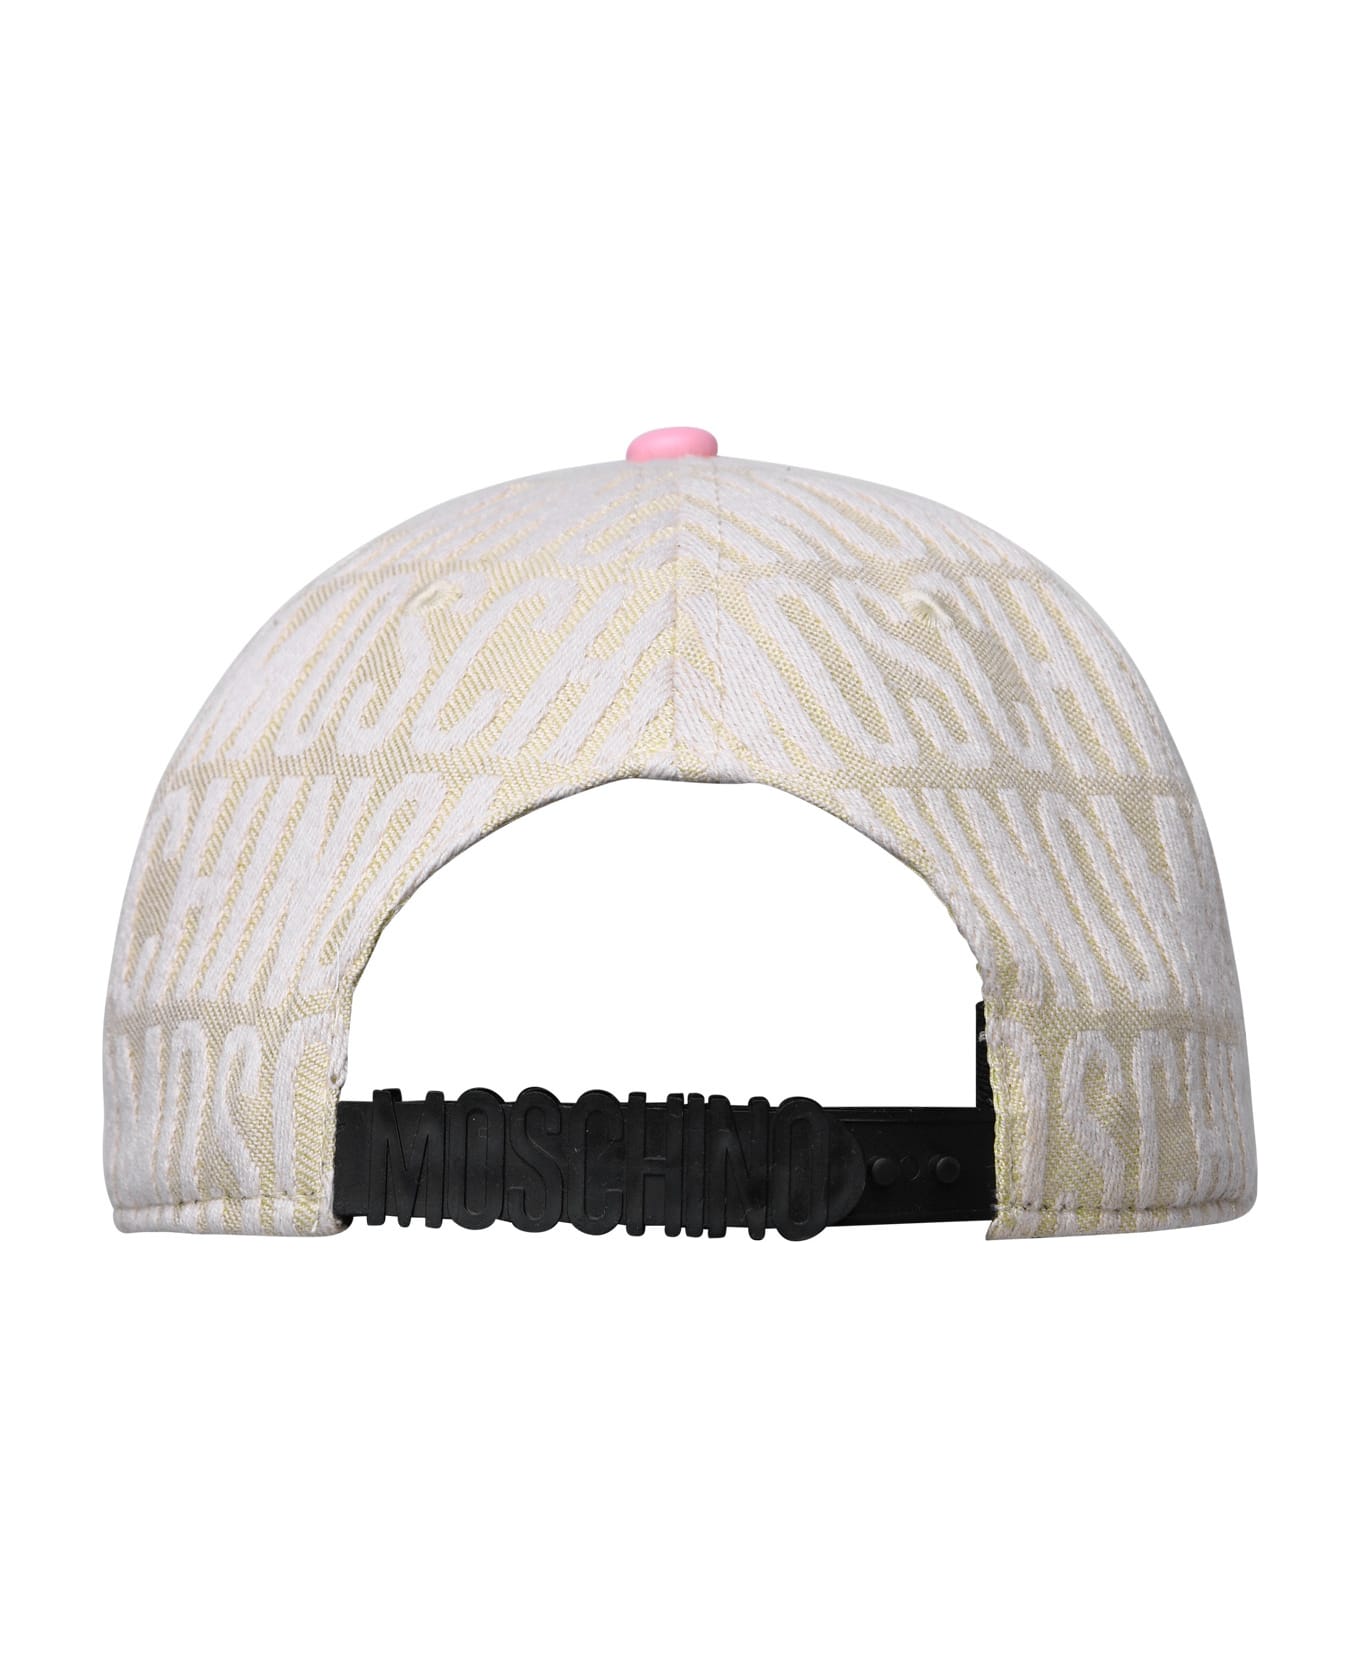 Moschino Hat In Ivory Cotton Blend - Ivory 帽子